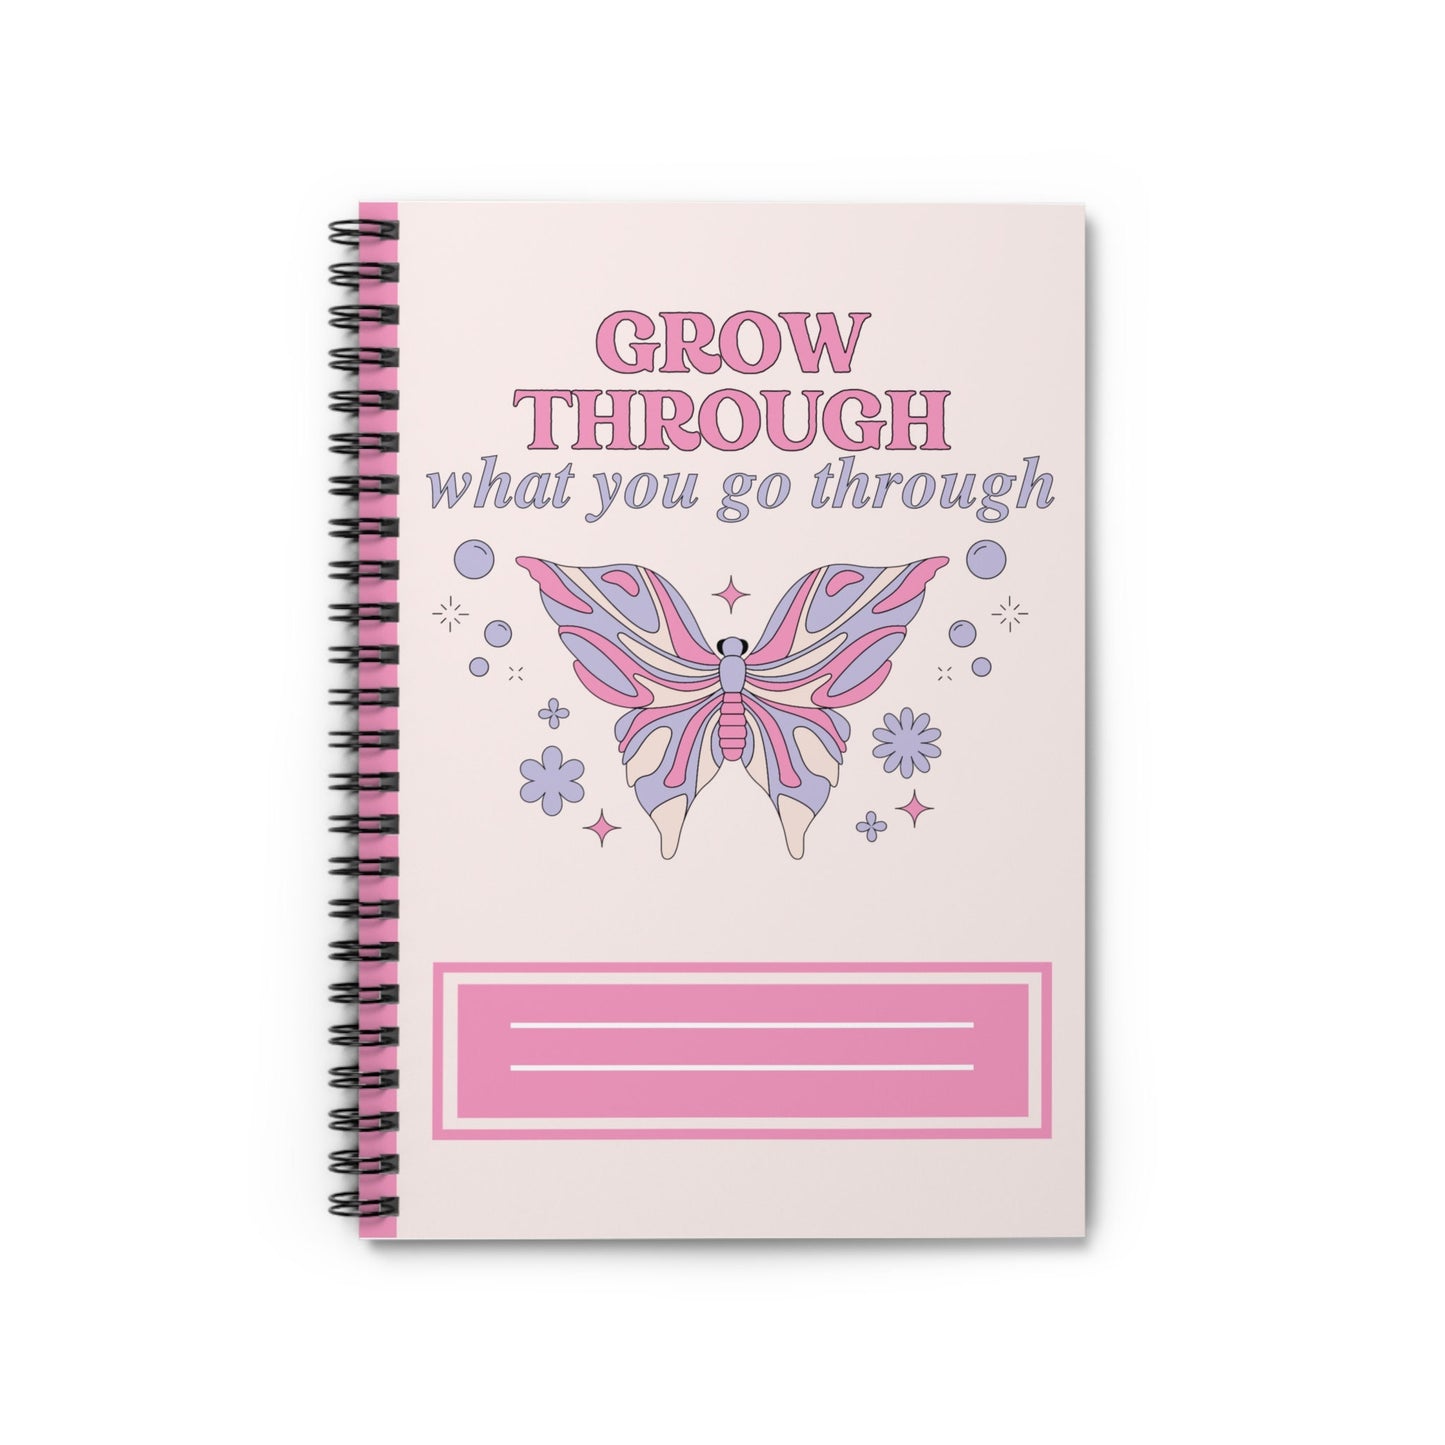 Spiral Notebook Ruled Lines Journal Notebook Stationary Gift Durable Cover 6x8 Inches - Grow Through What You Go Through